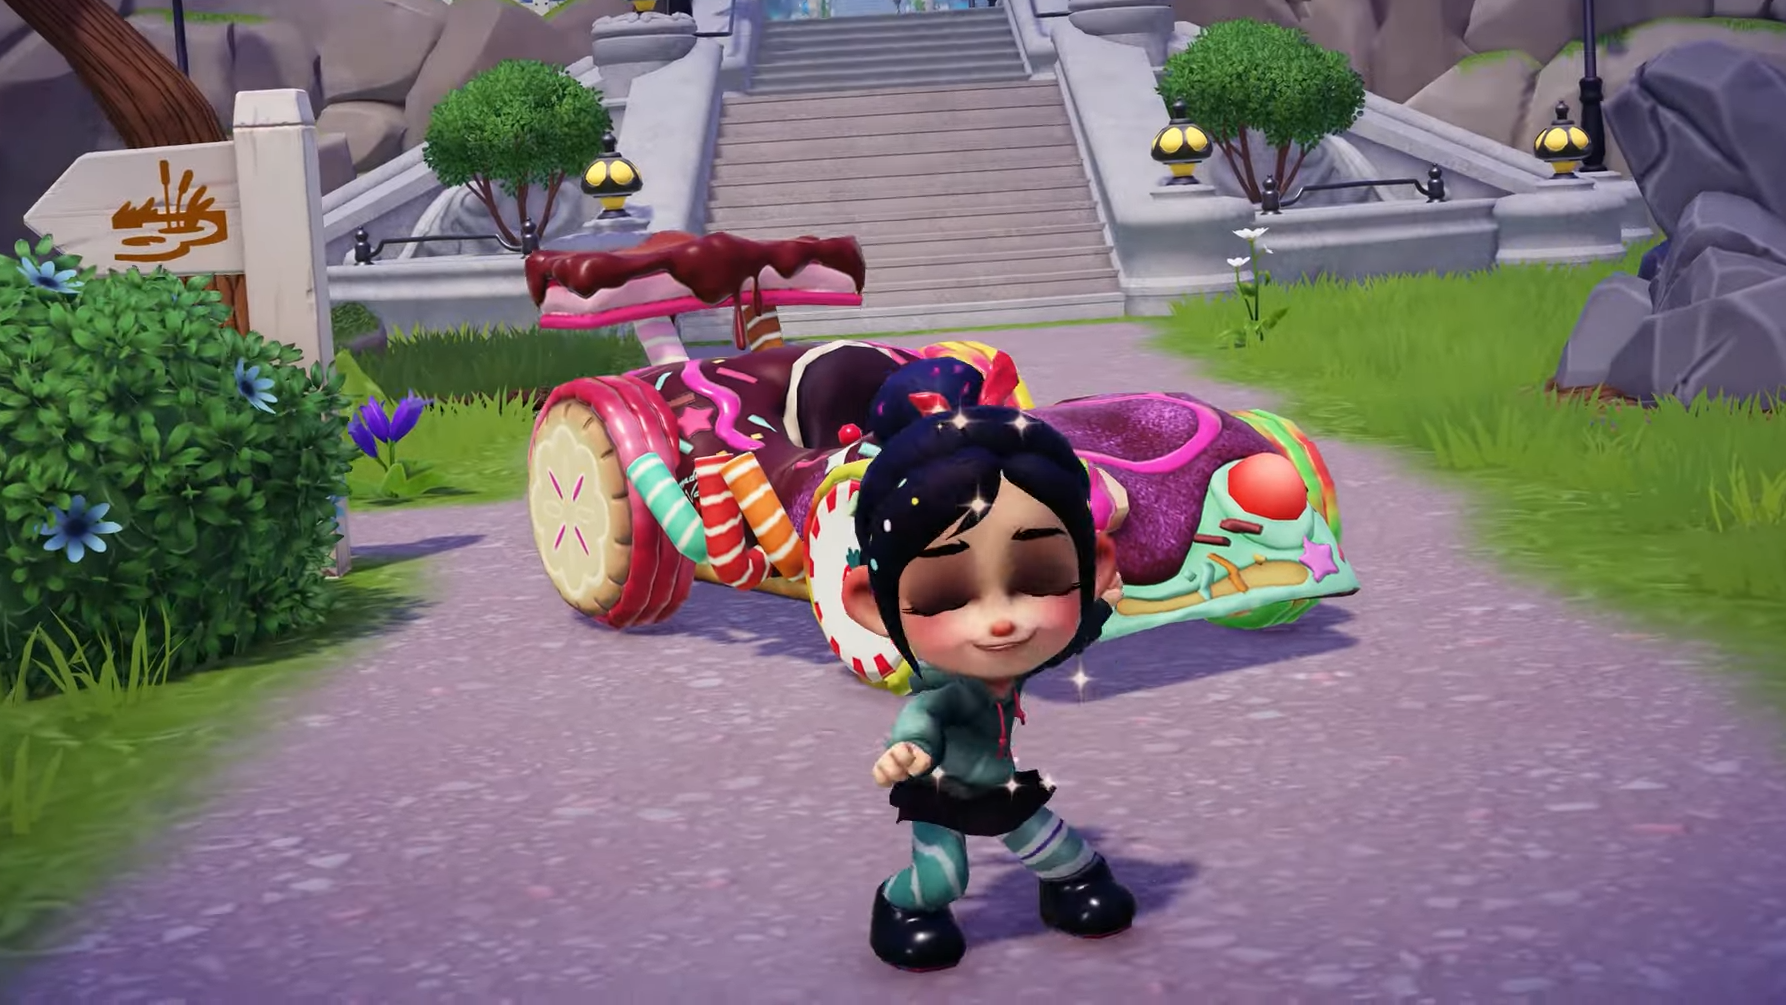 How to get Vanellope in Disney Dreamlight Valley